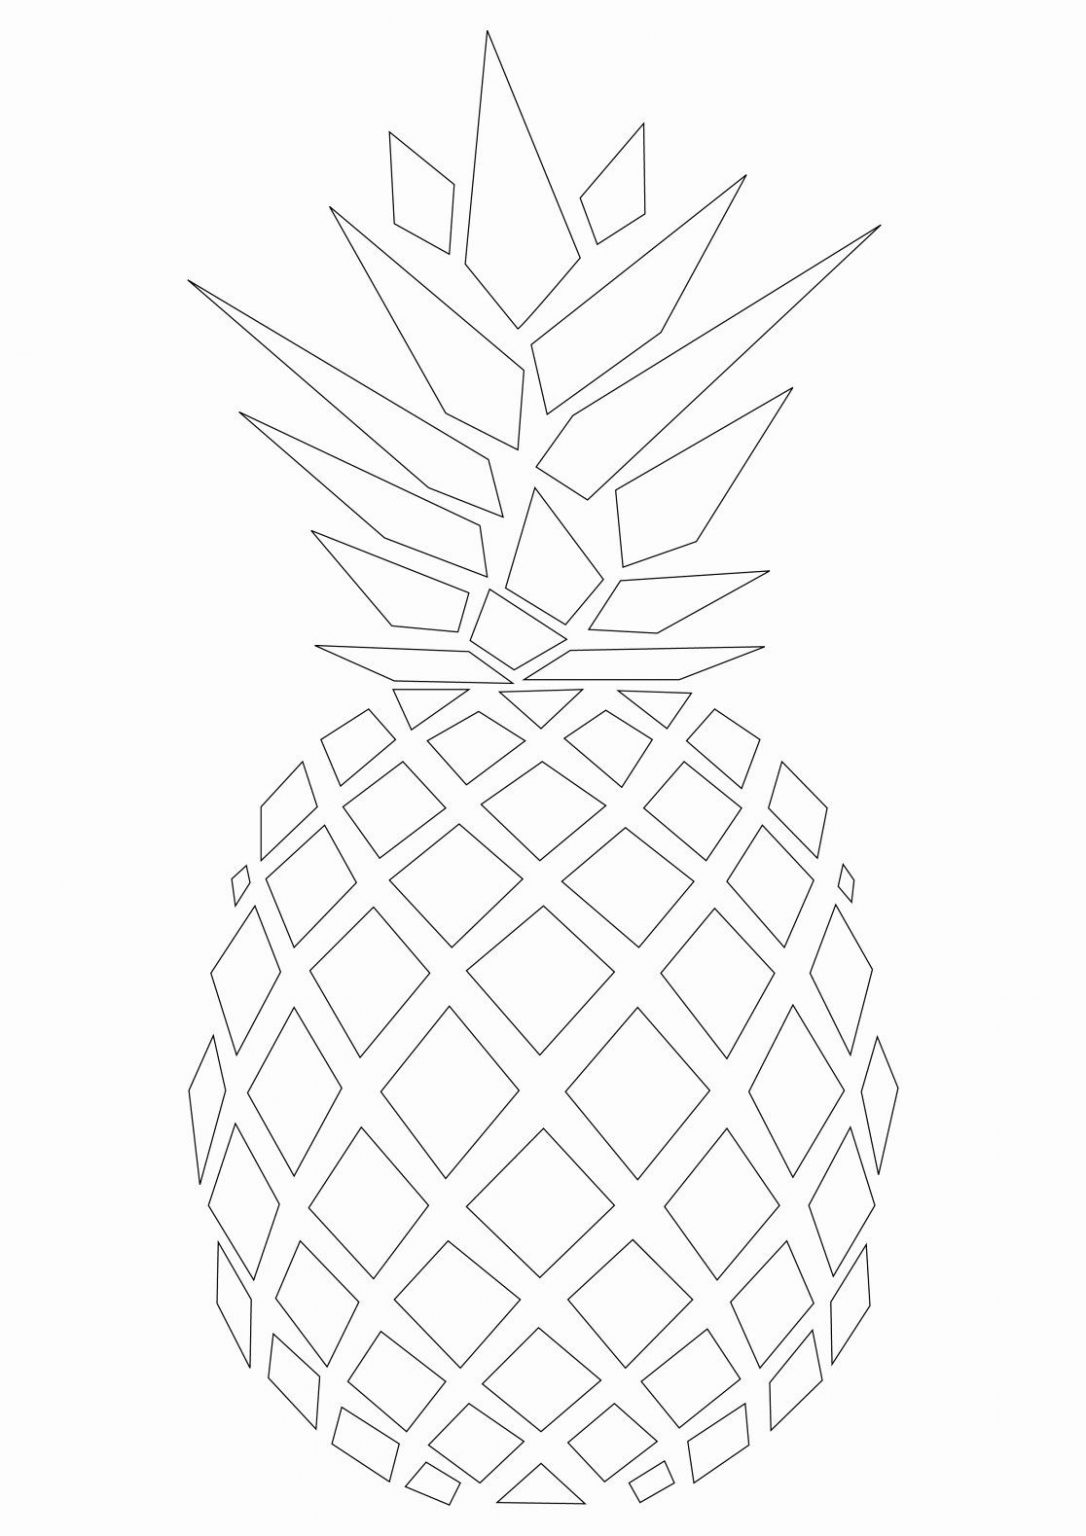 Fruits Coloring Sheets Free Printable In 2020 | Pineapple - Printable